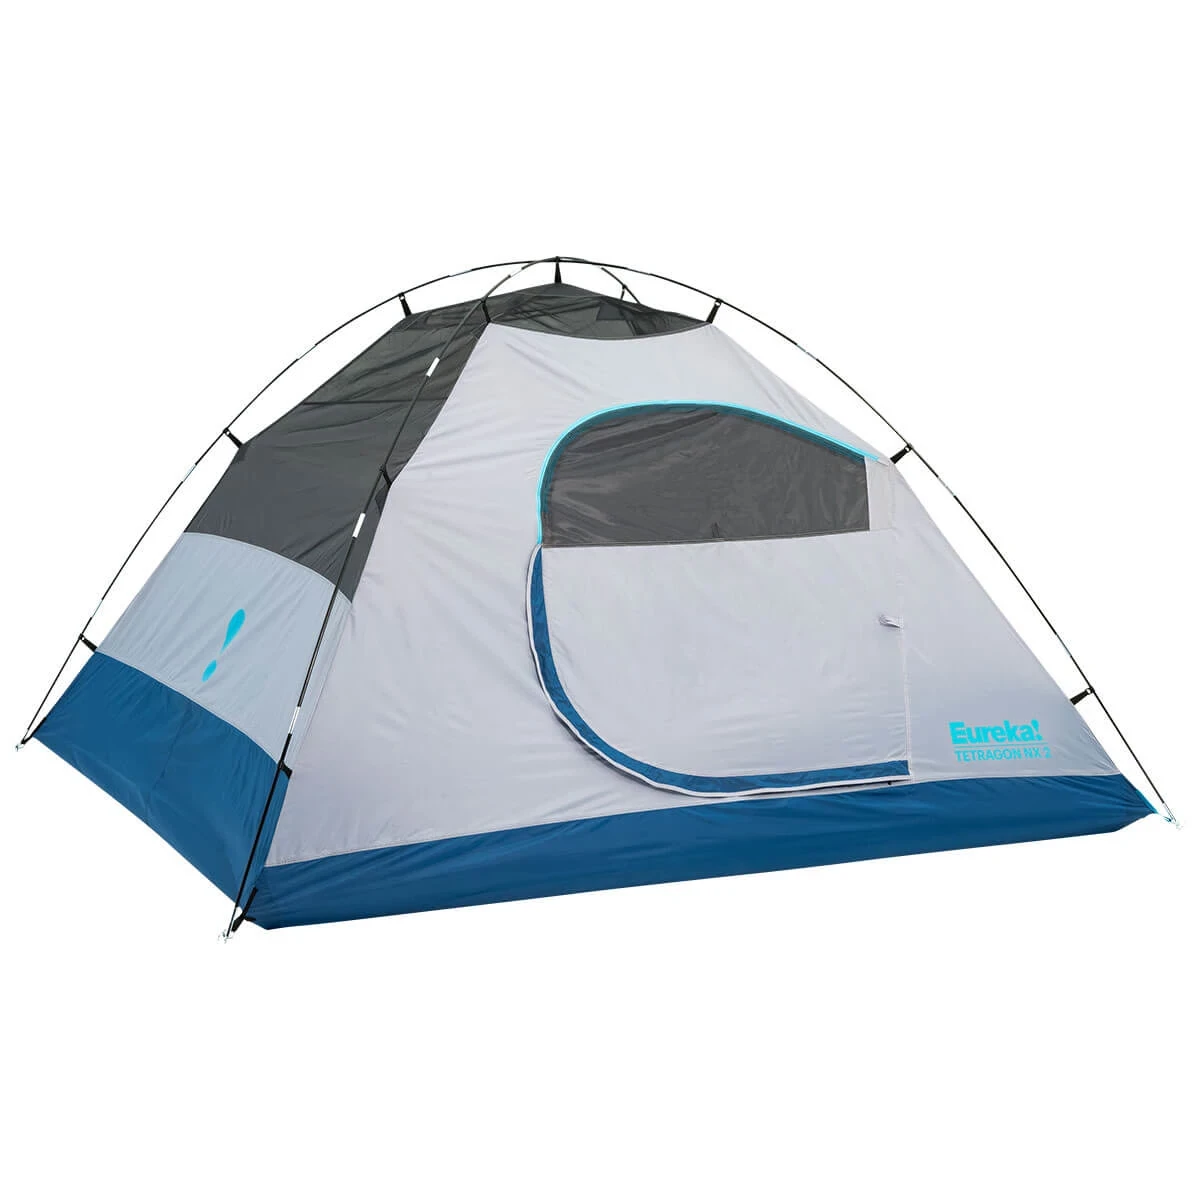 Tetragon NX 2 tent without rainfly